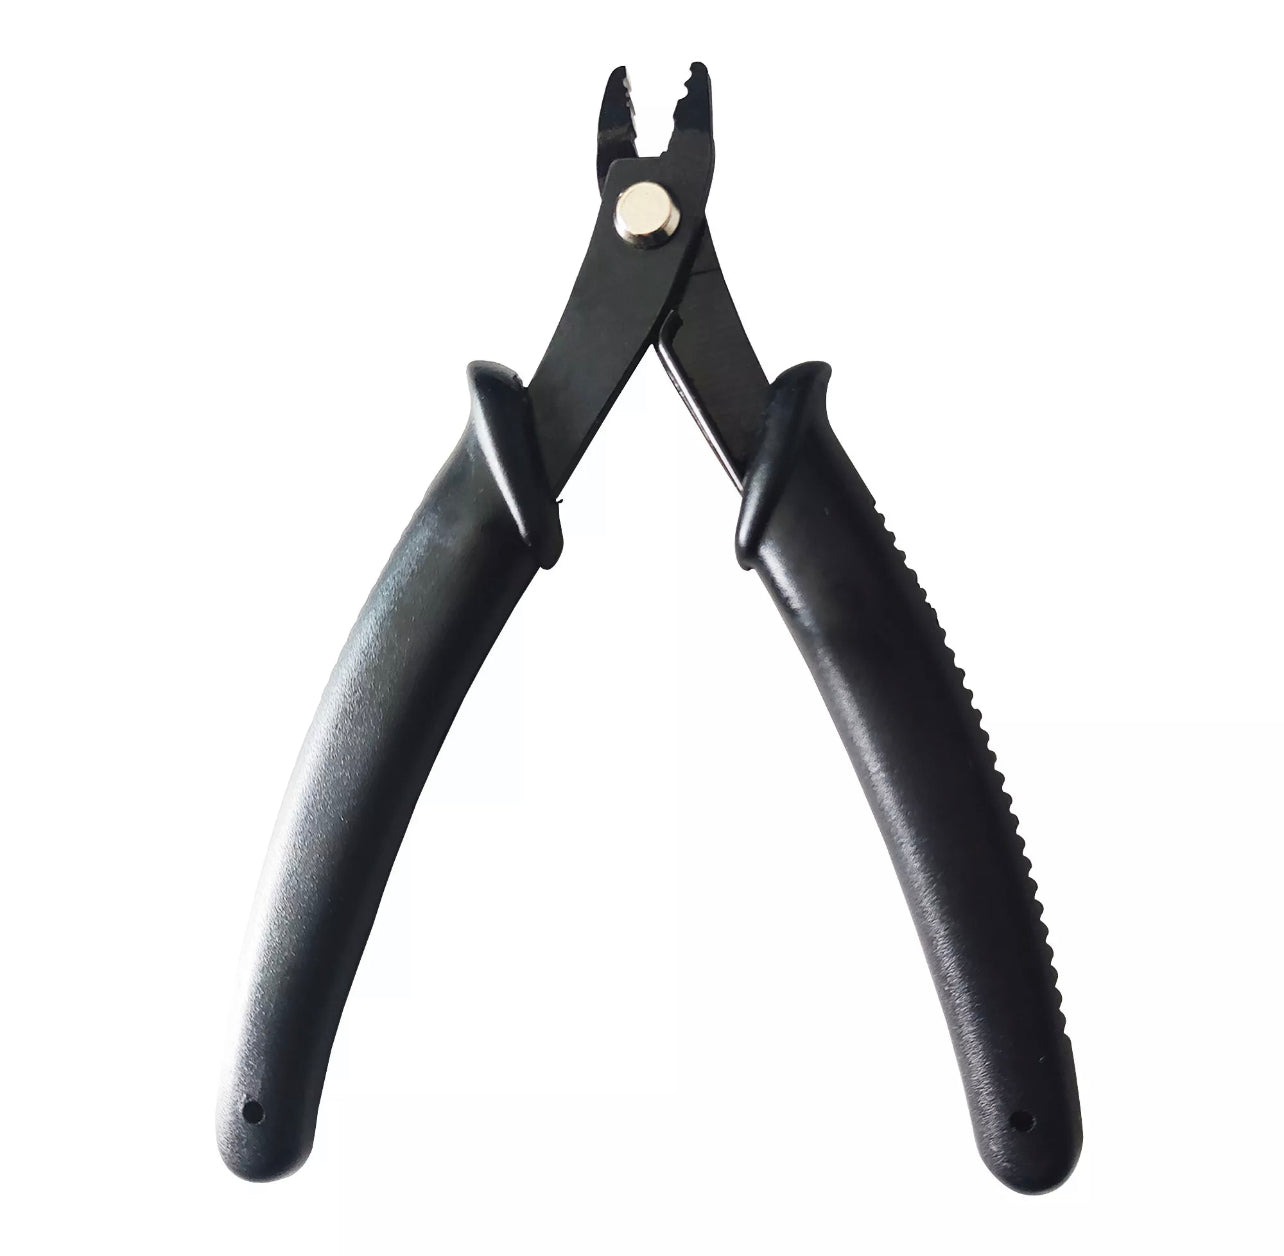 Pliers Apply & Removal of Nano or Micro Beads